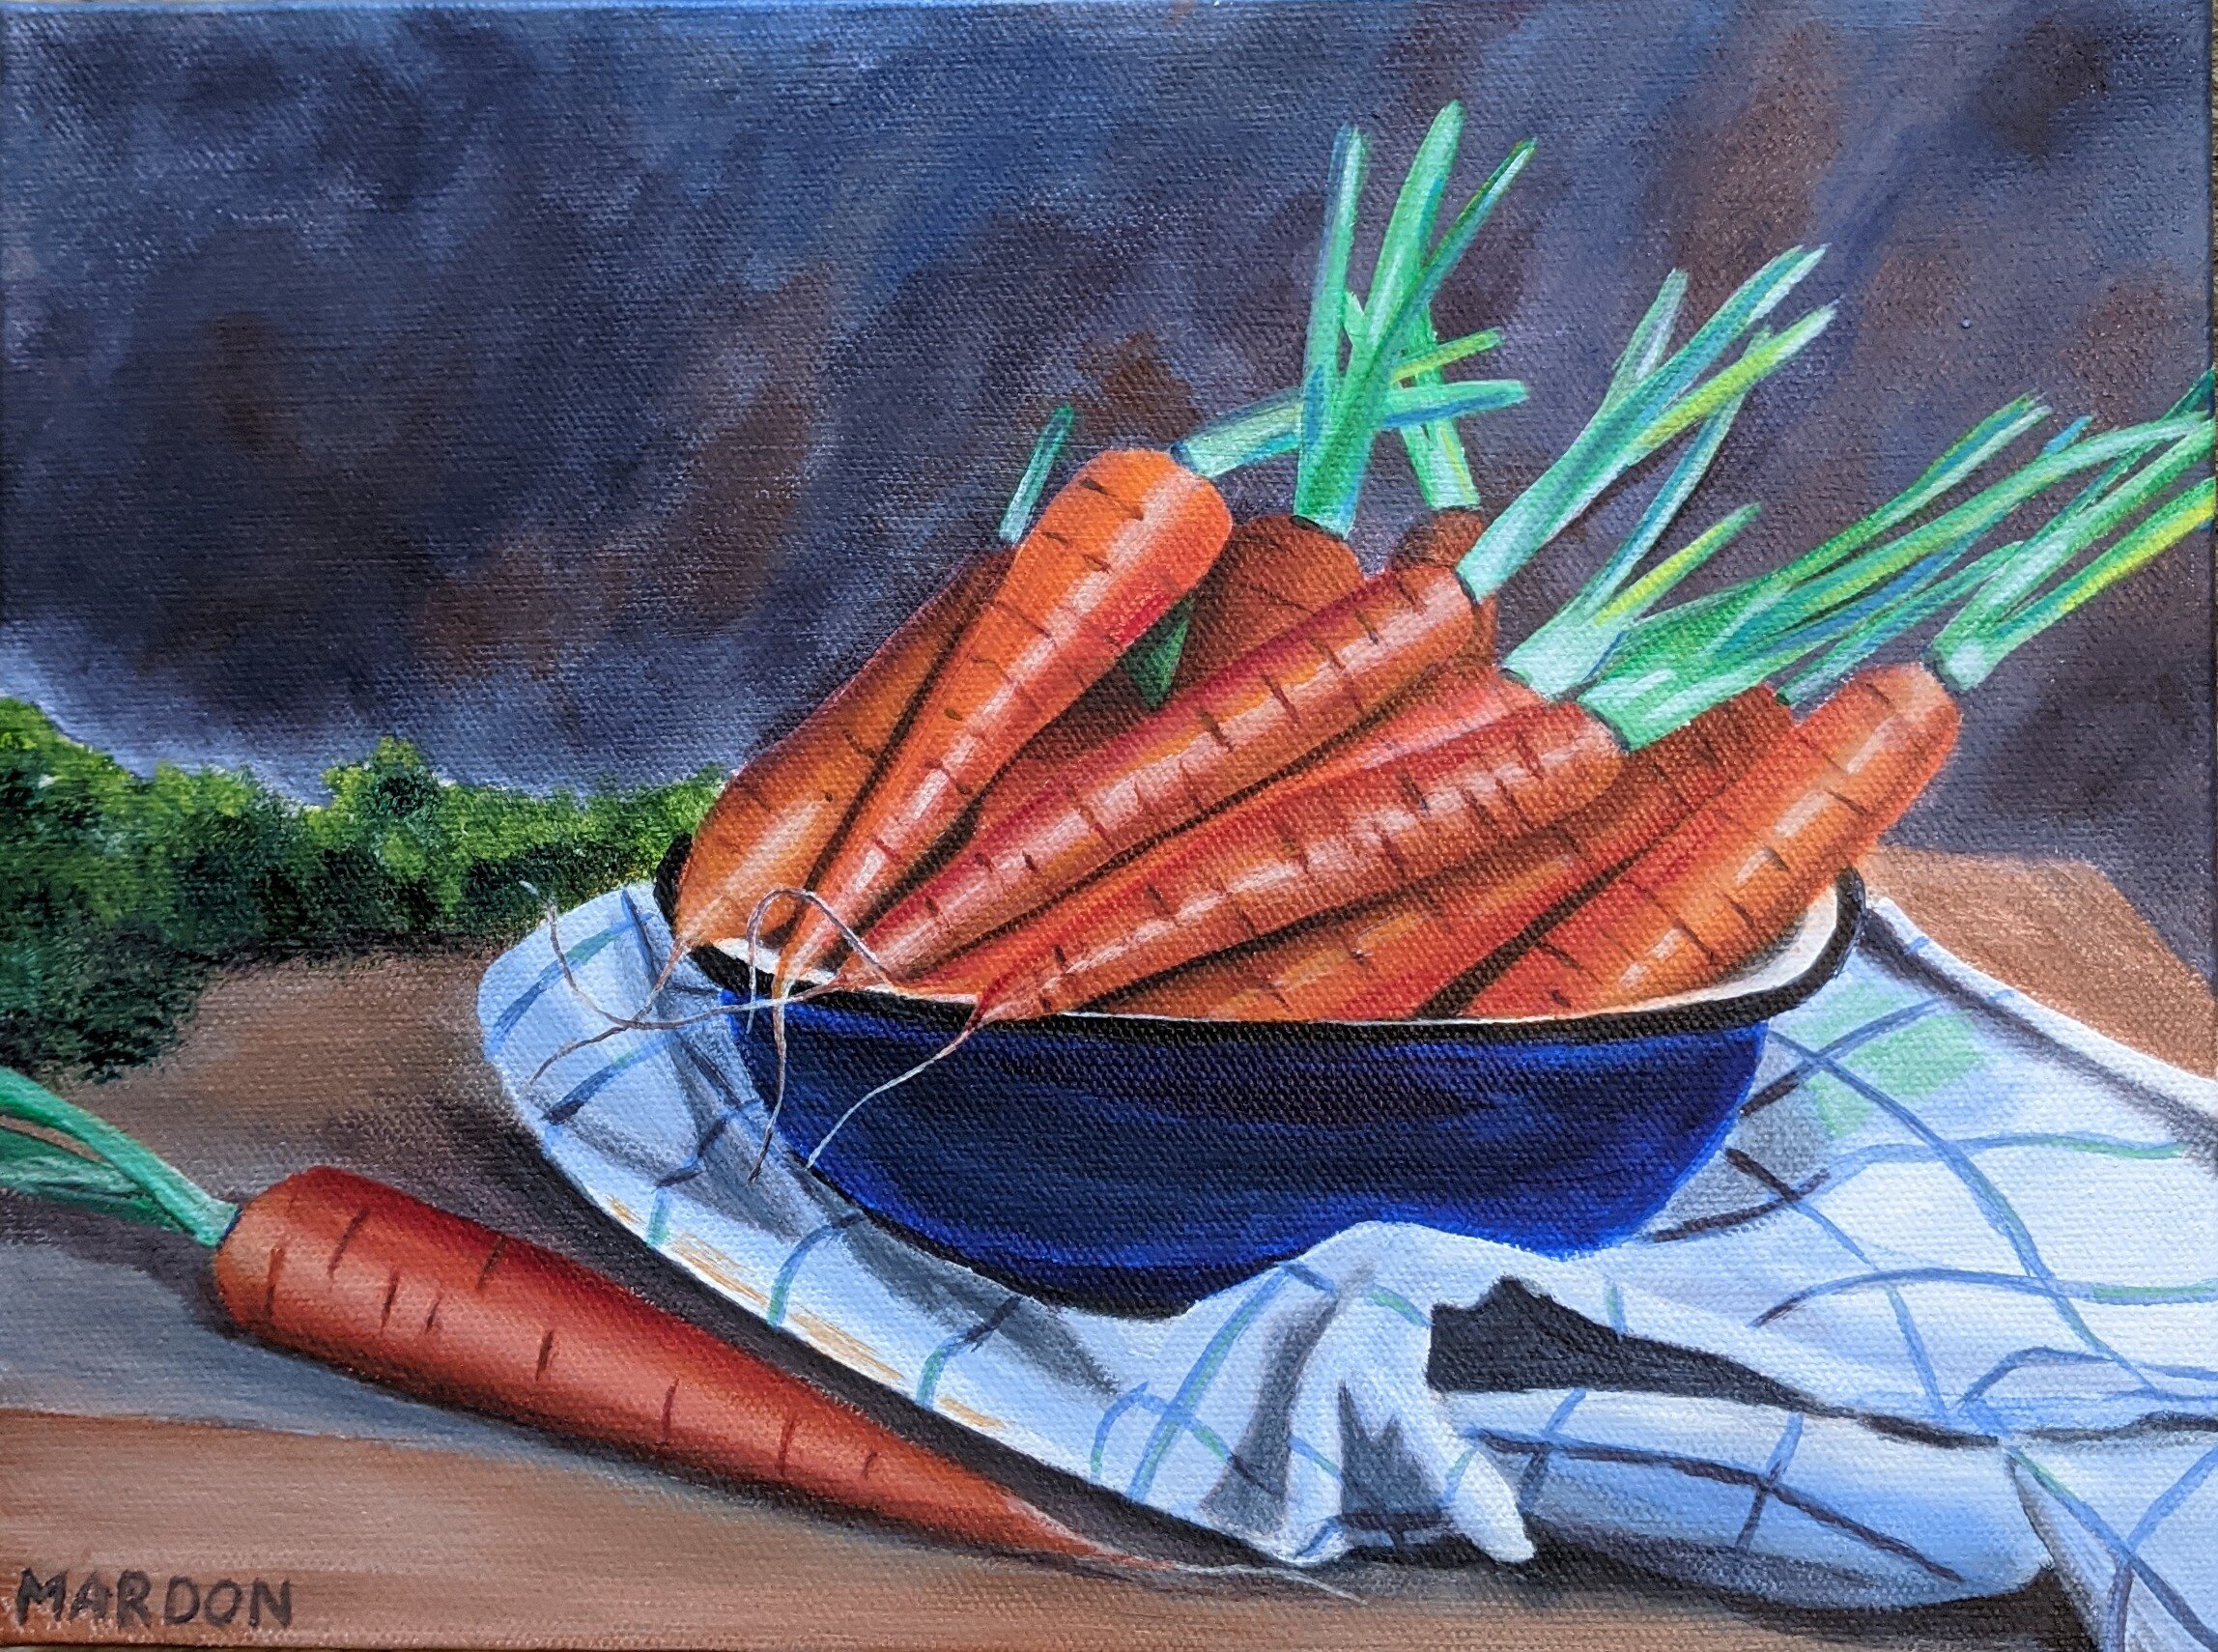 Bowl of Carrots